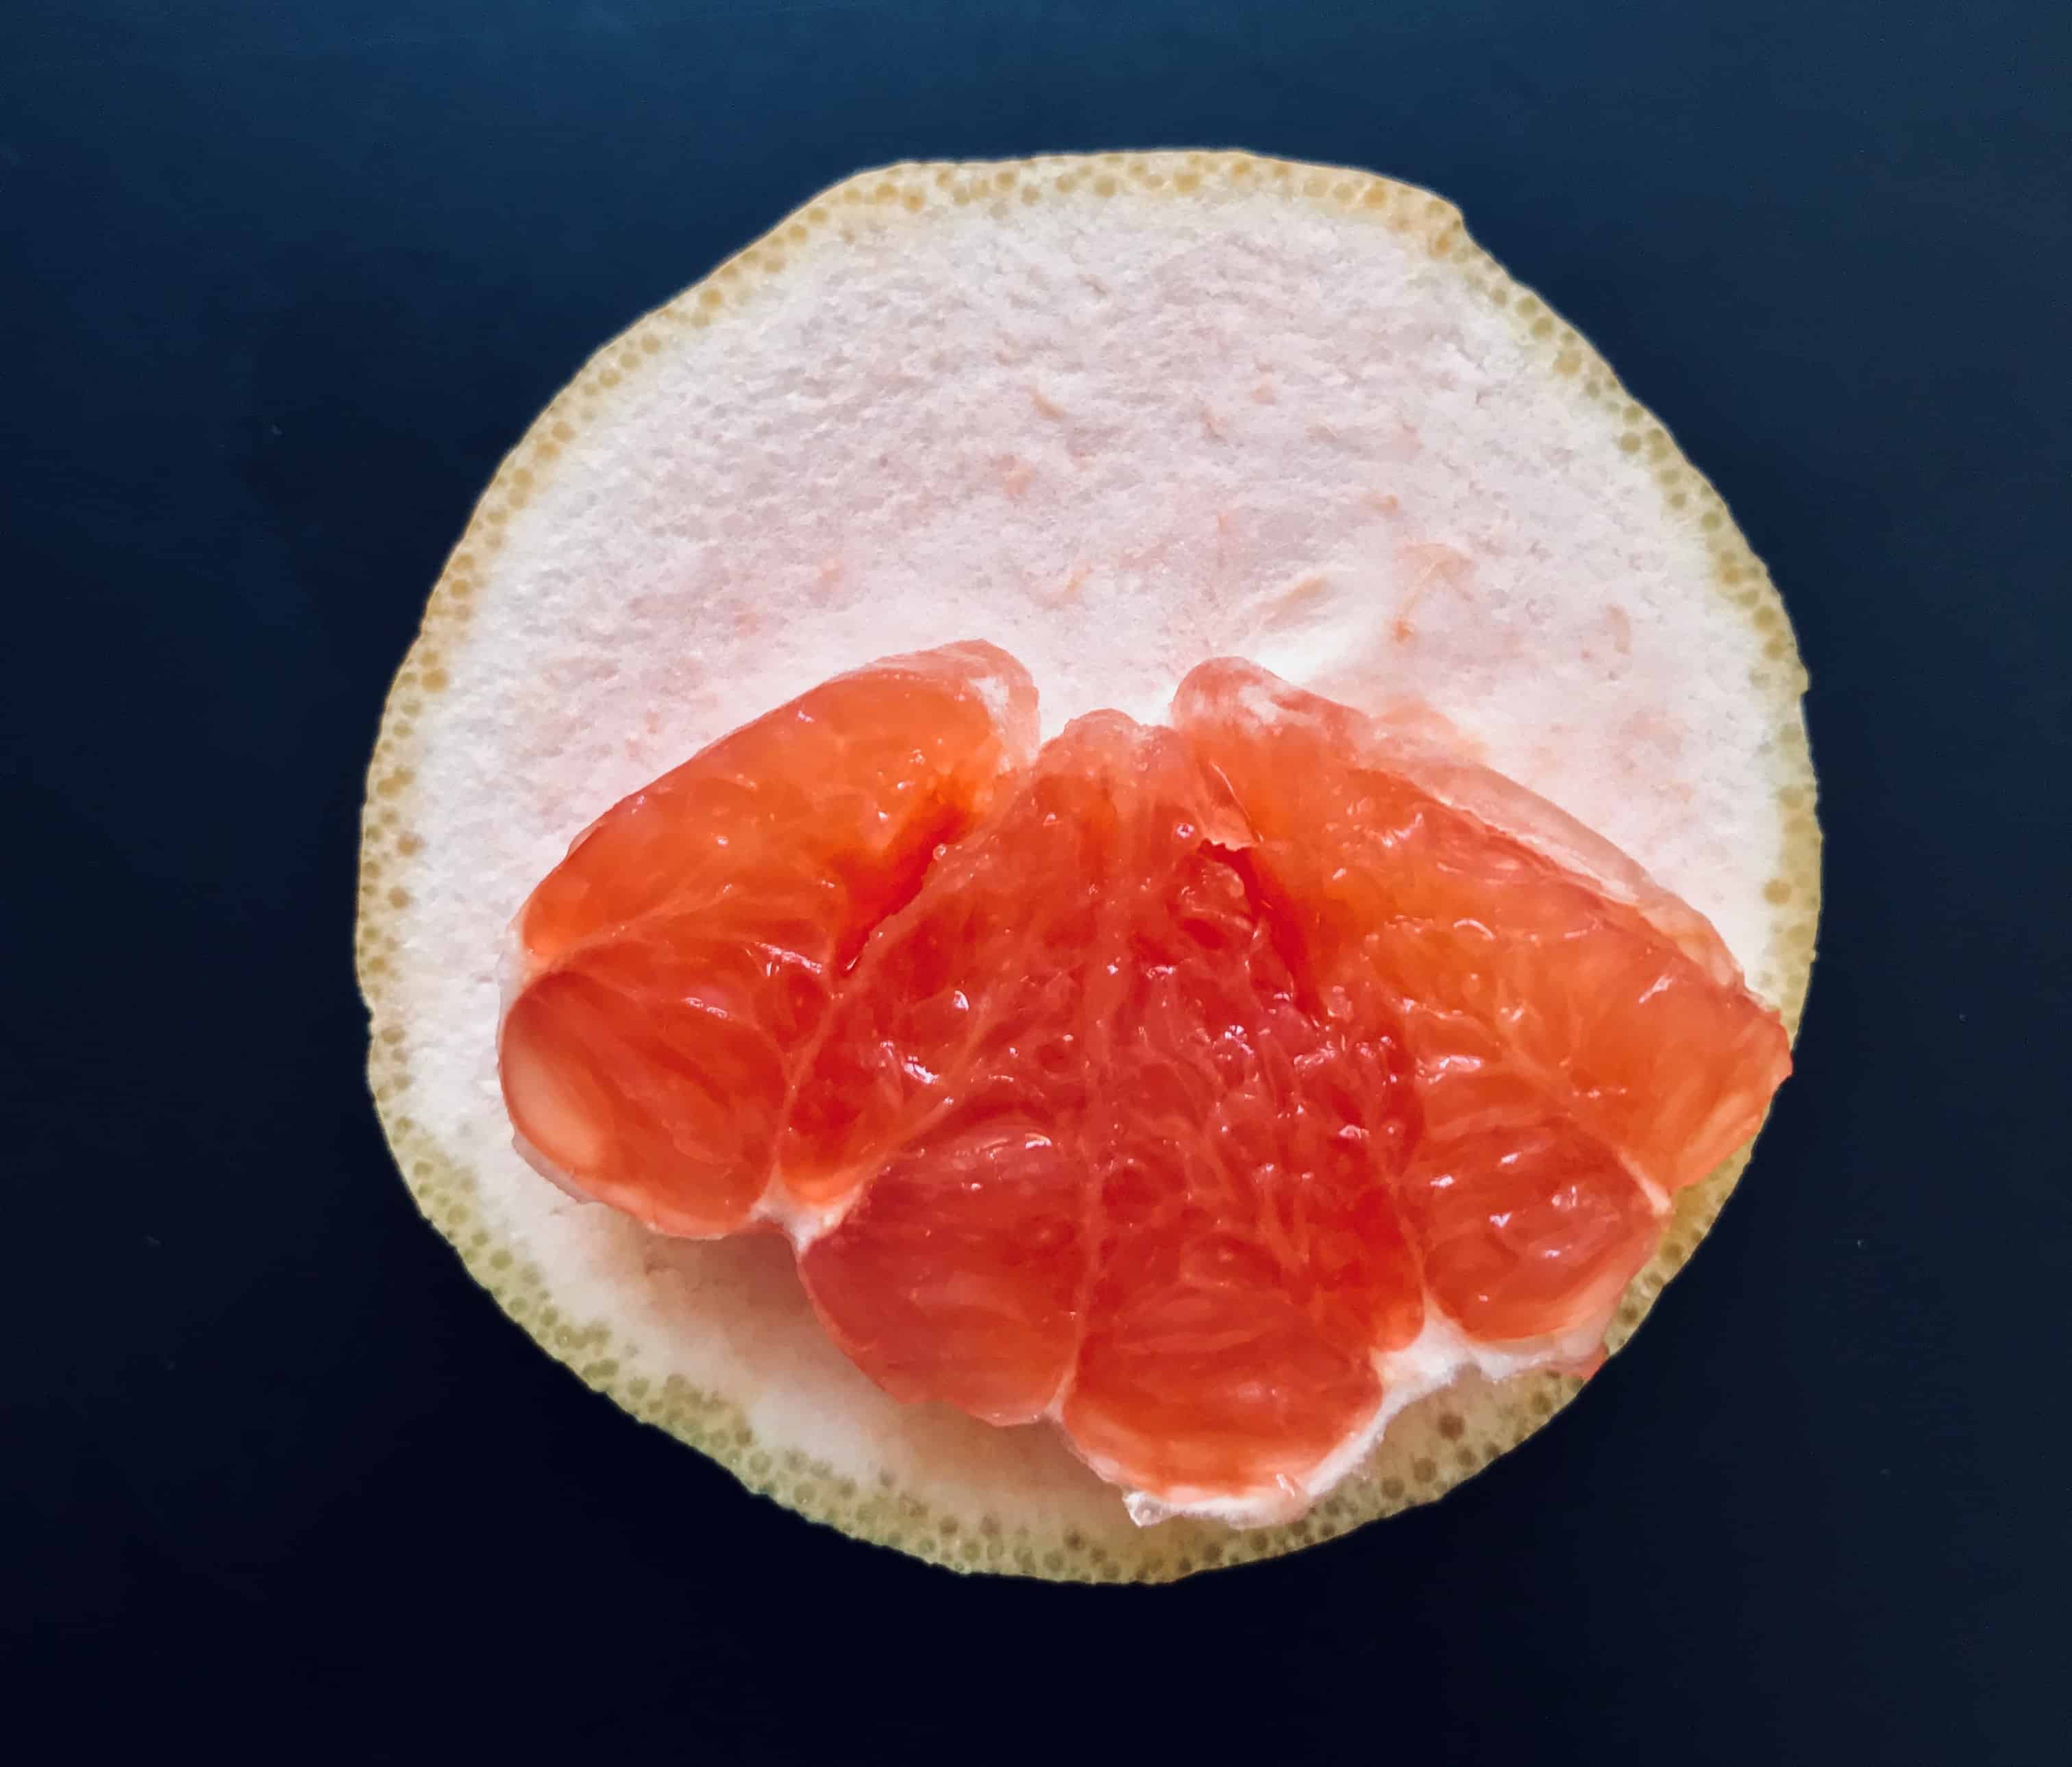 You can now share links to your photos, including photos of grapefruits.